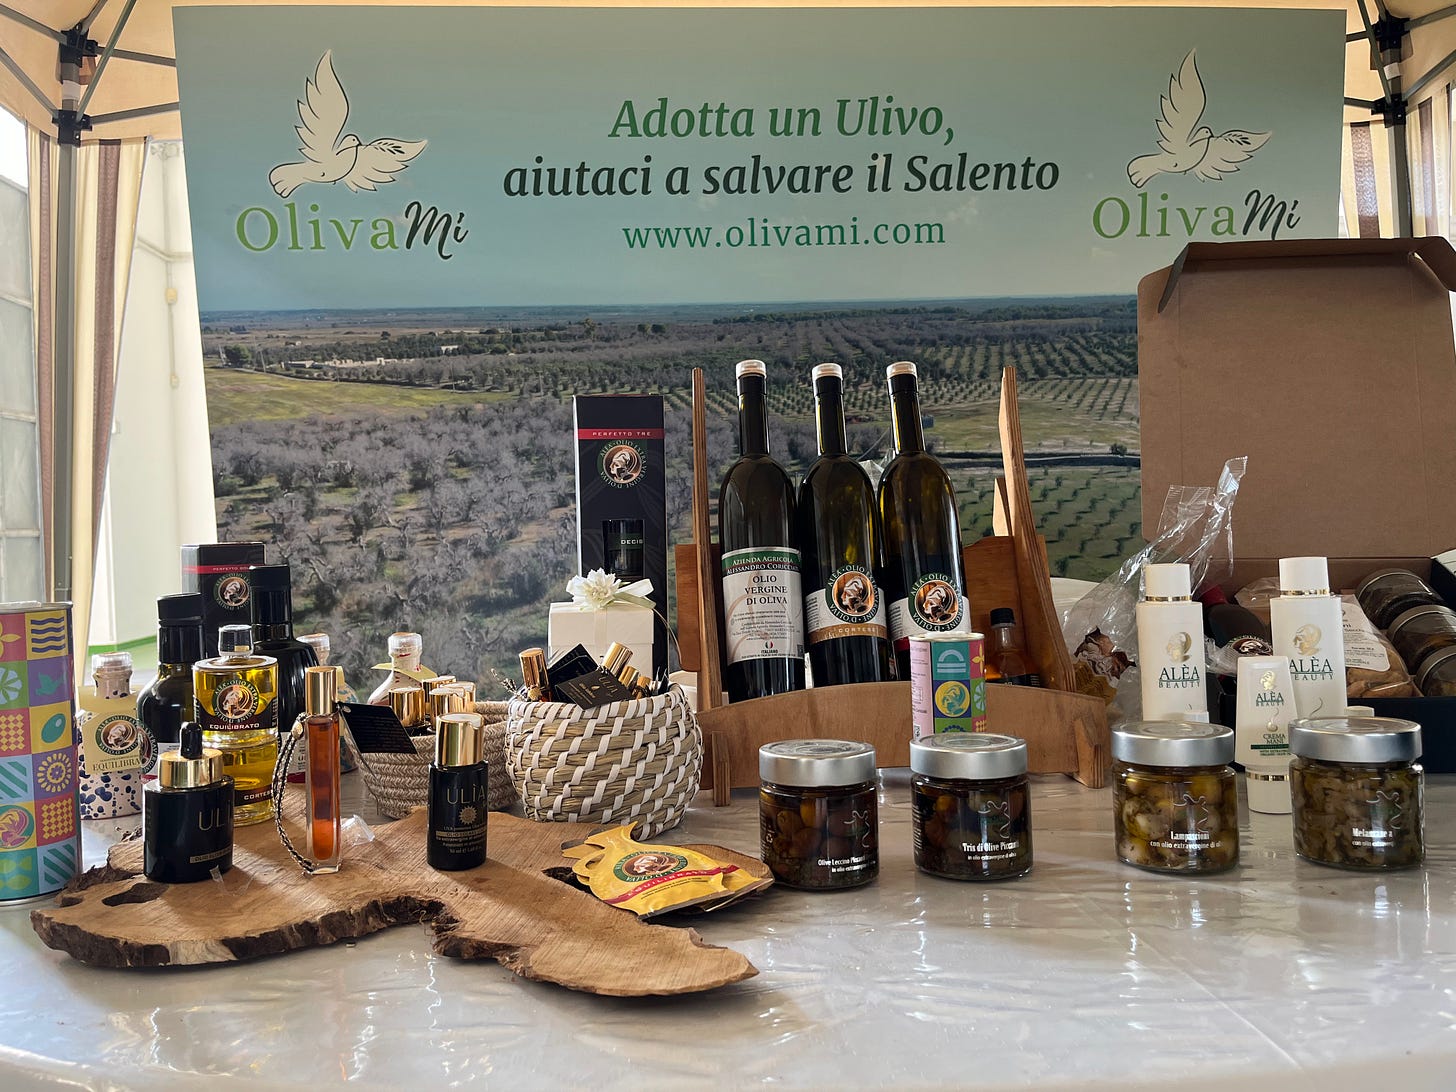 Olive oil products on display